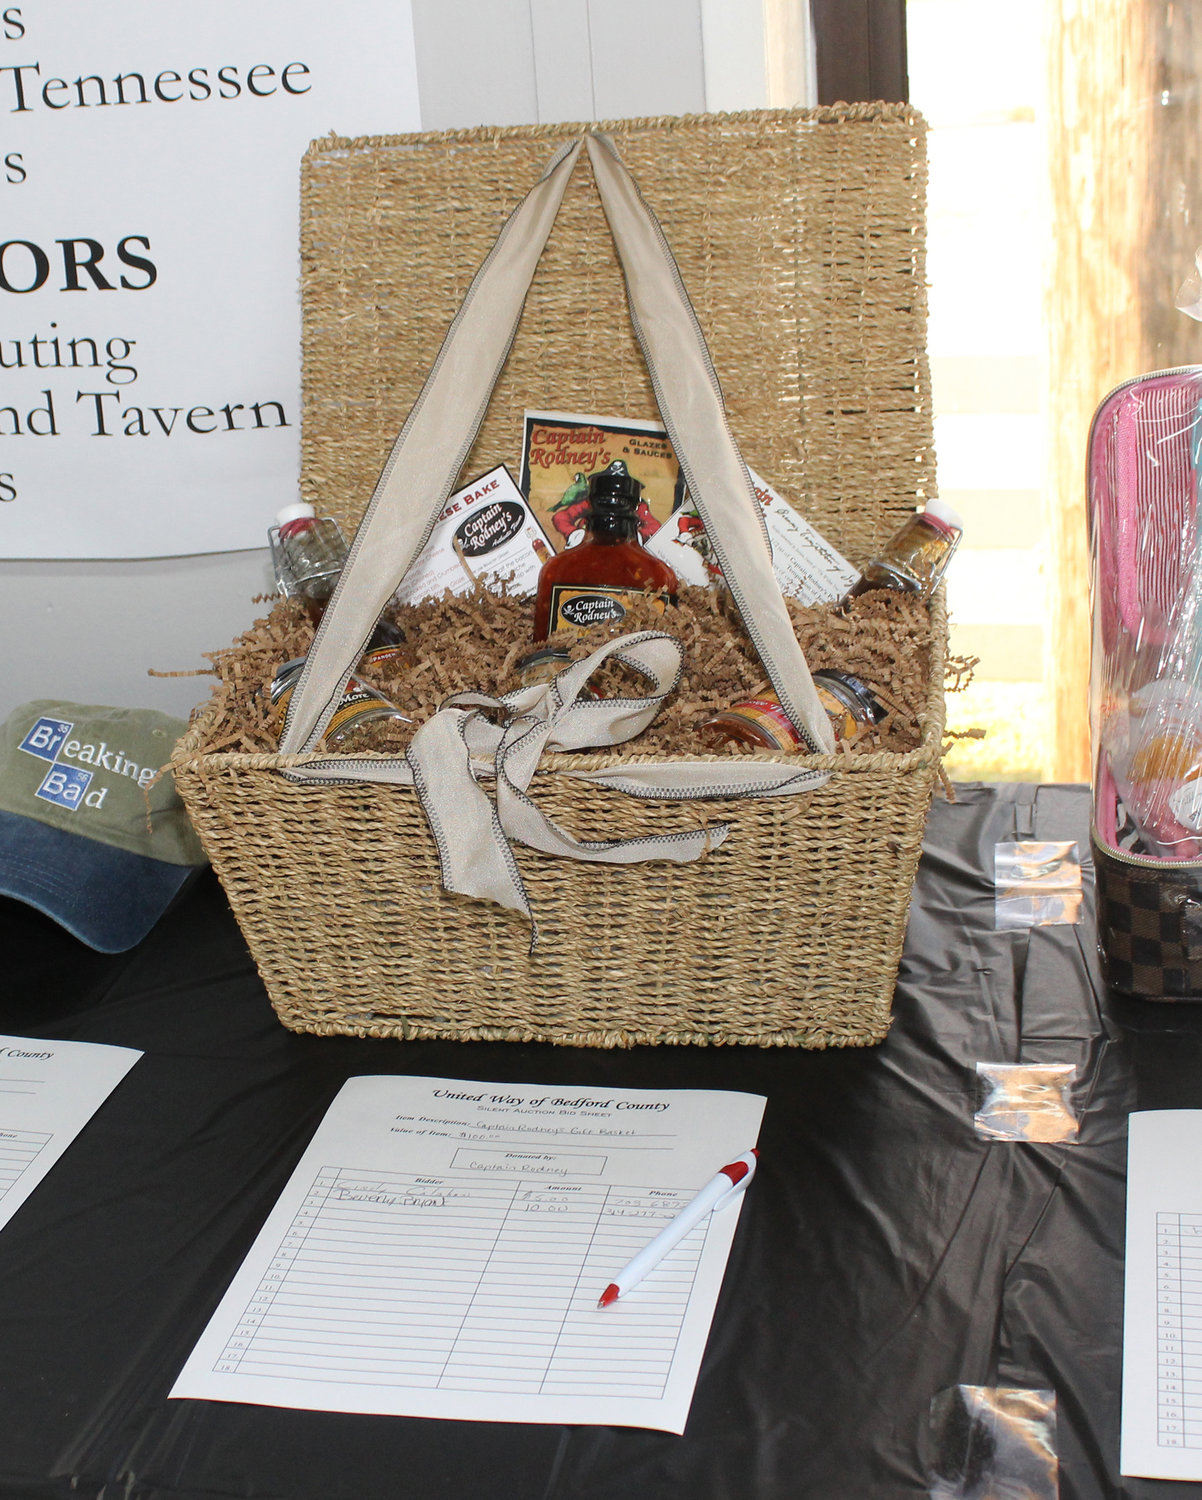 A silent auction was held in conjunction with the event.